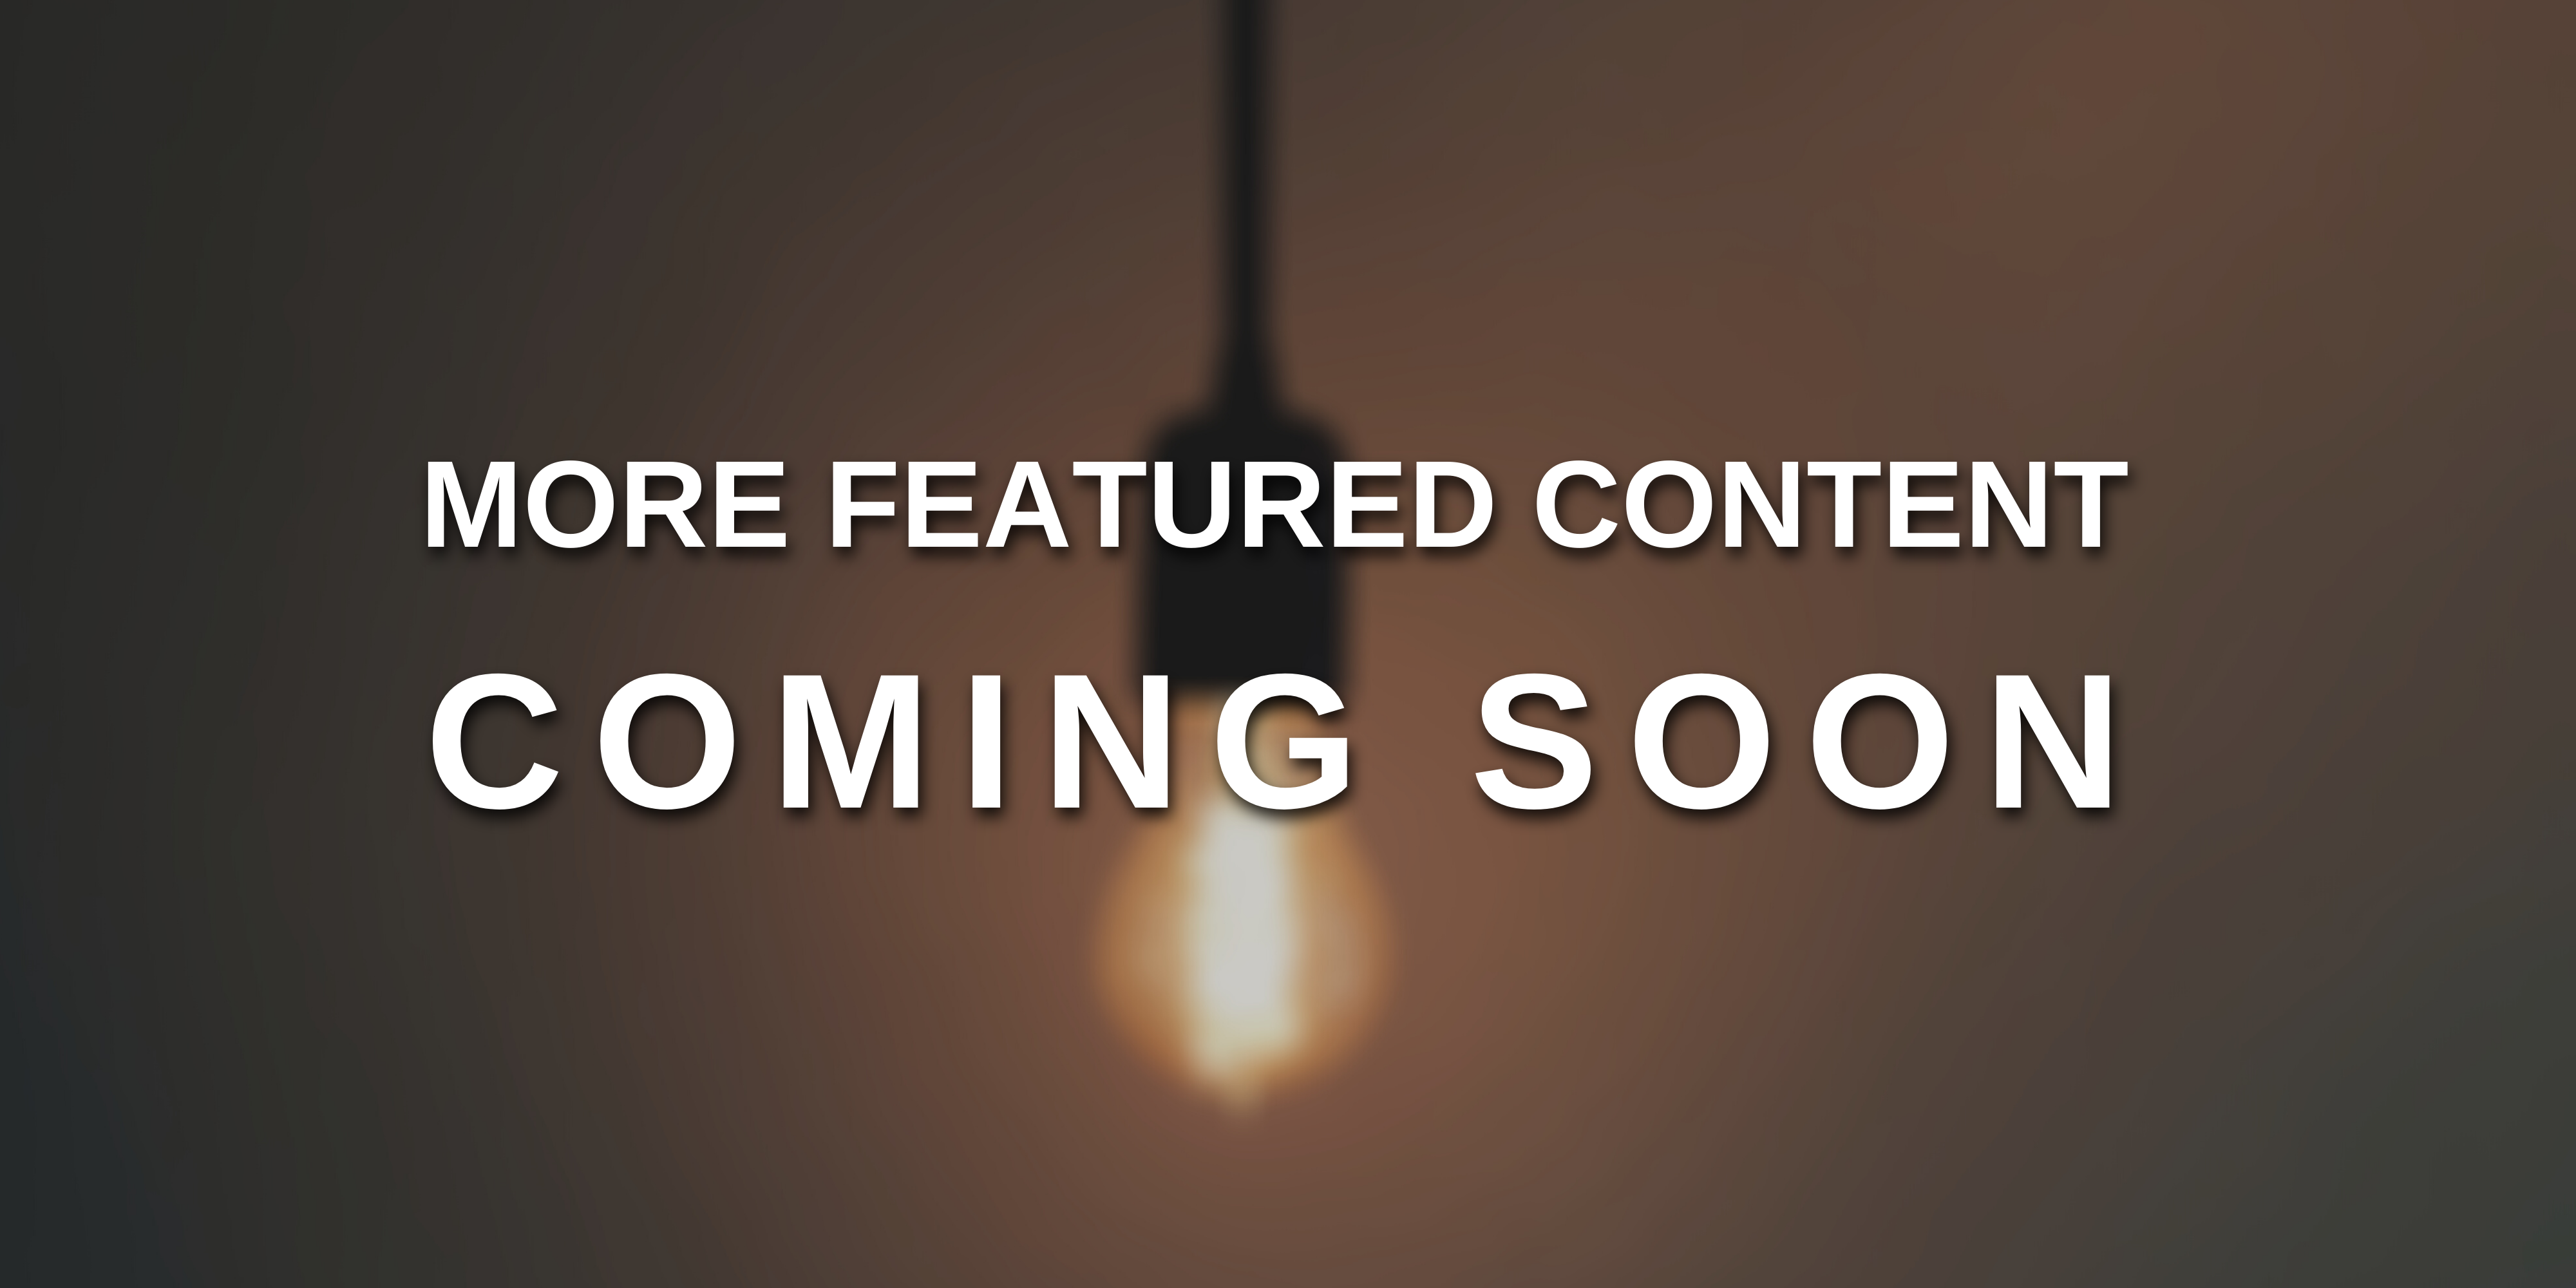 More featured content coming soon!